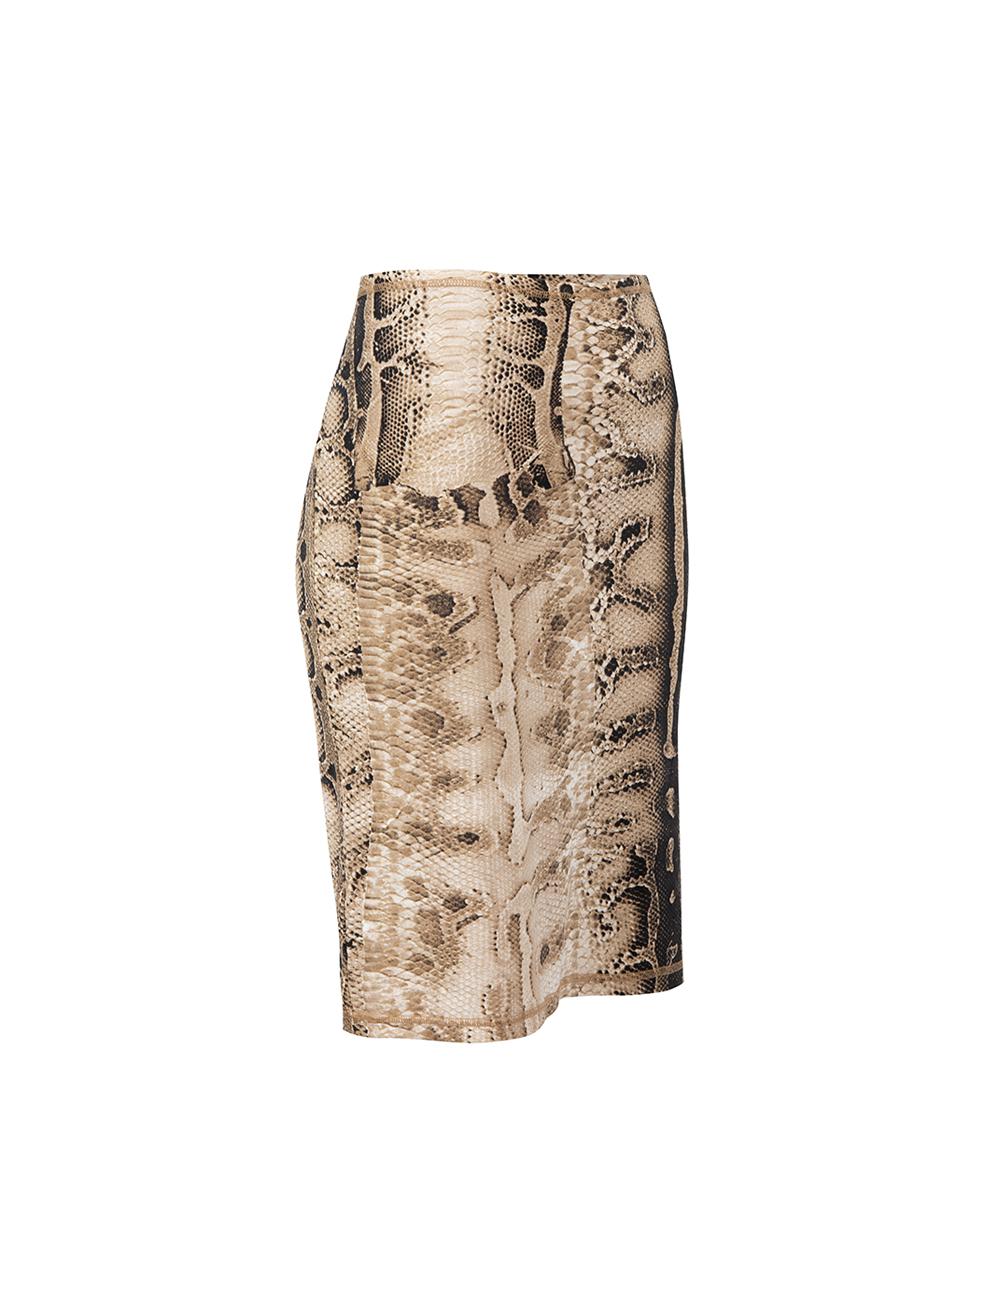 CONDITION is Very good. Hardly any visible wear to skirt is evident on this used Just Cavalli designer resale item.



Details


Brown

Synthetic

Skirt

Snake print

Stretchy

Figure hugging fit





Made in Italy 



Composition

86% Polyamide,